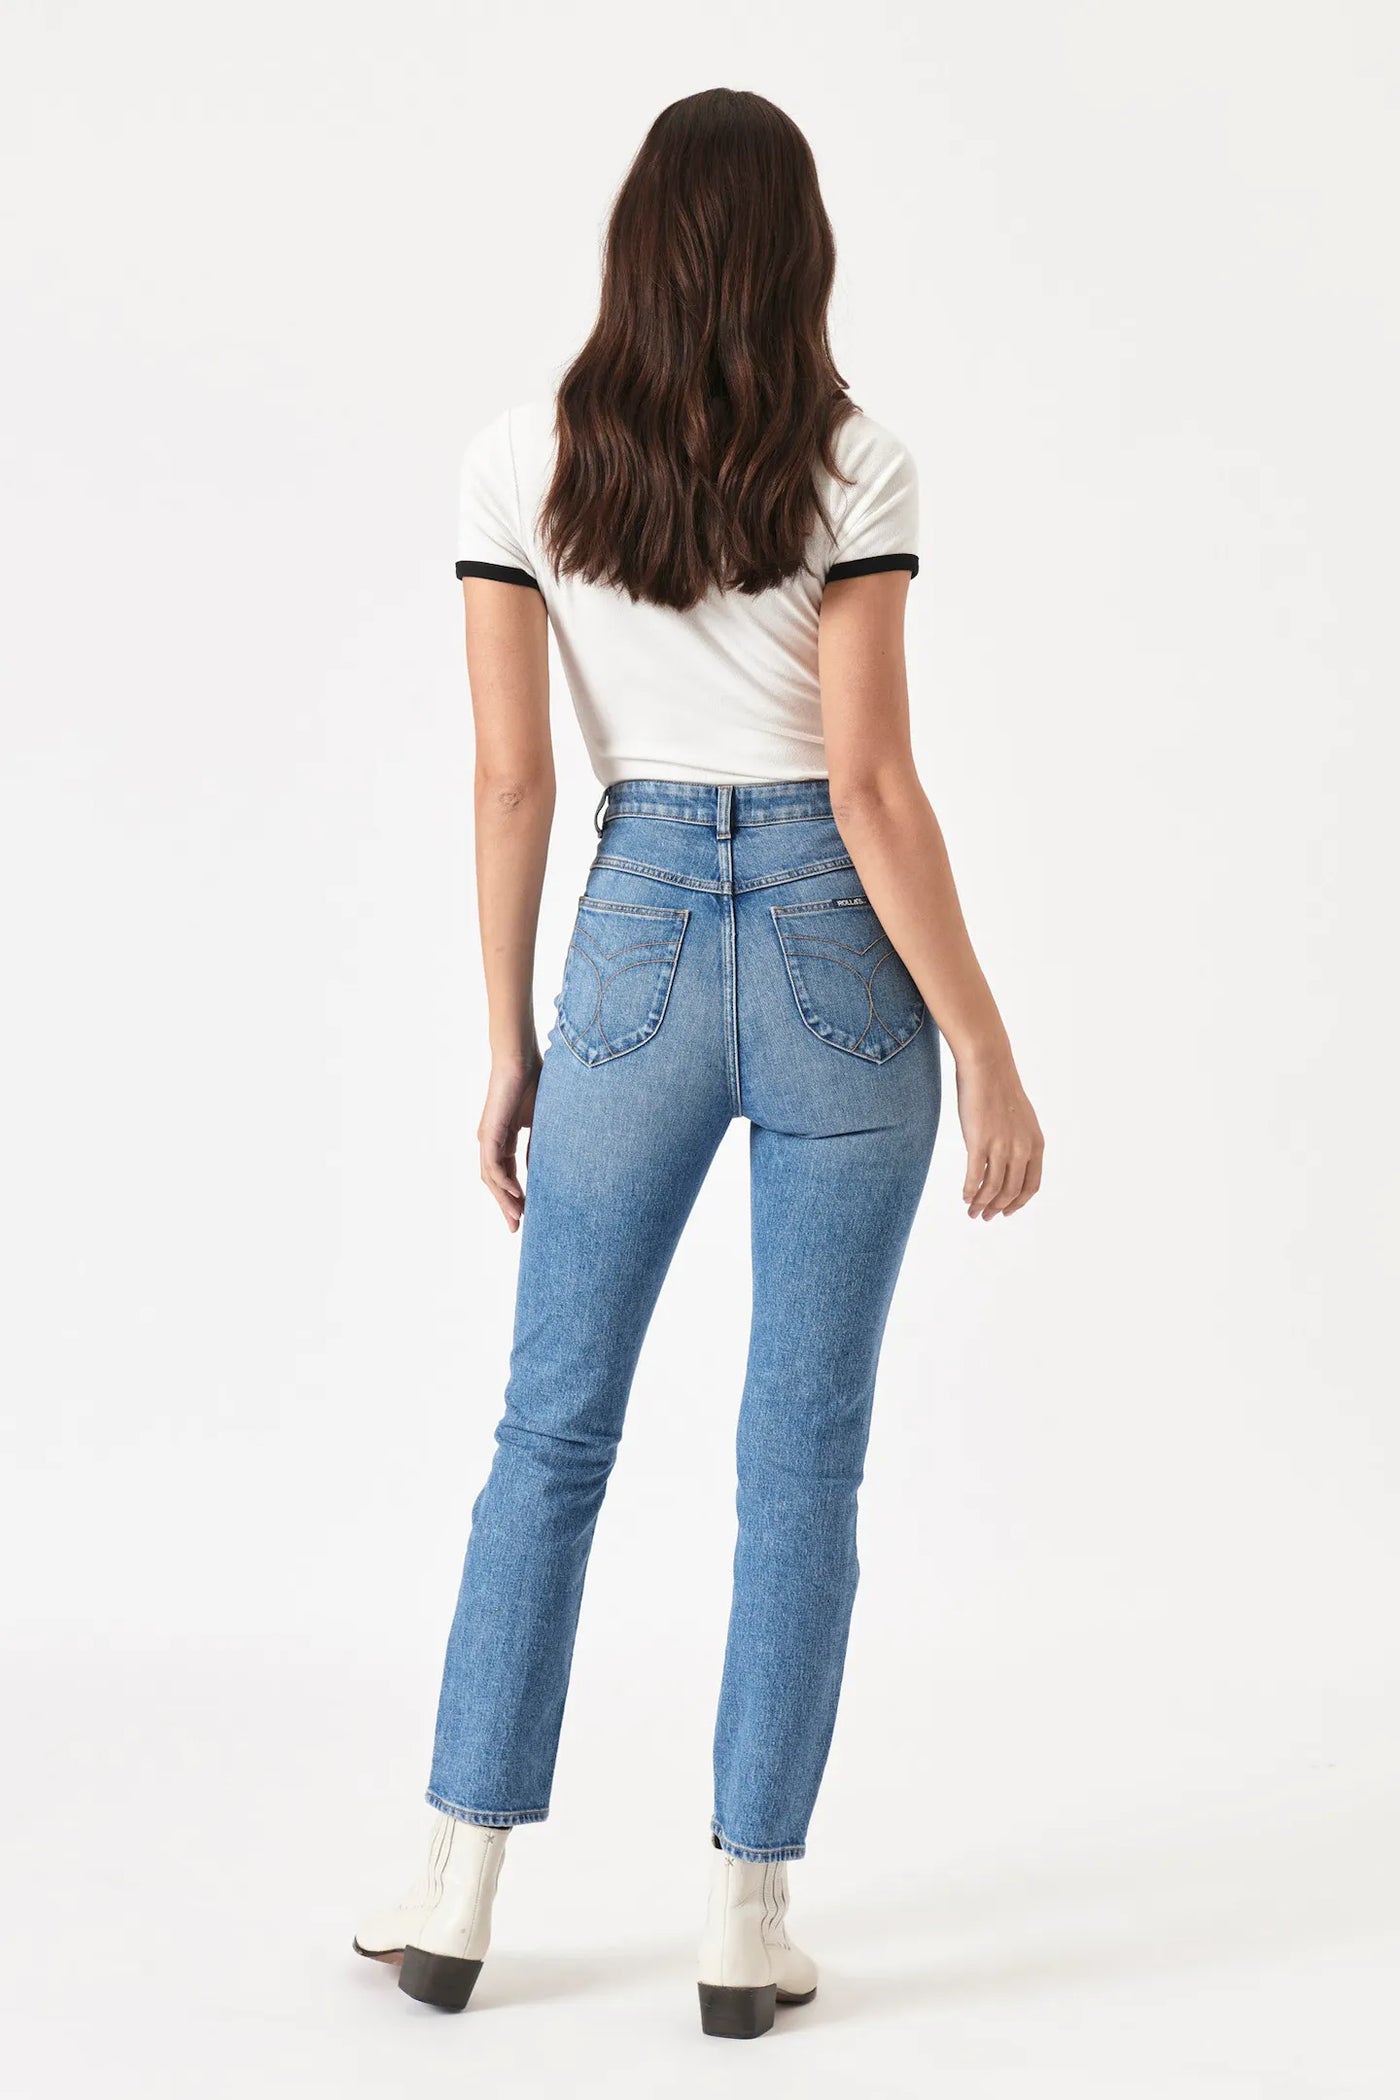 duster cyprus mid blue jeans